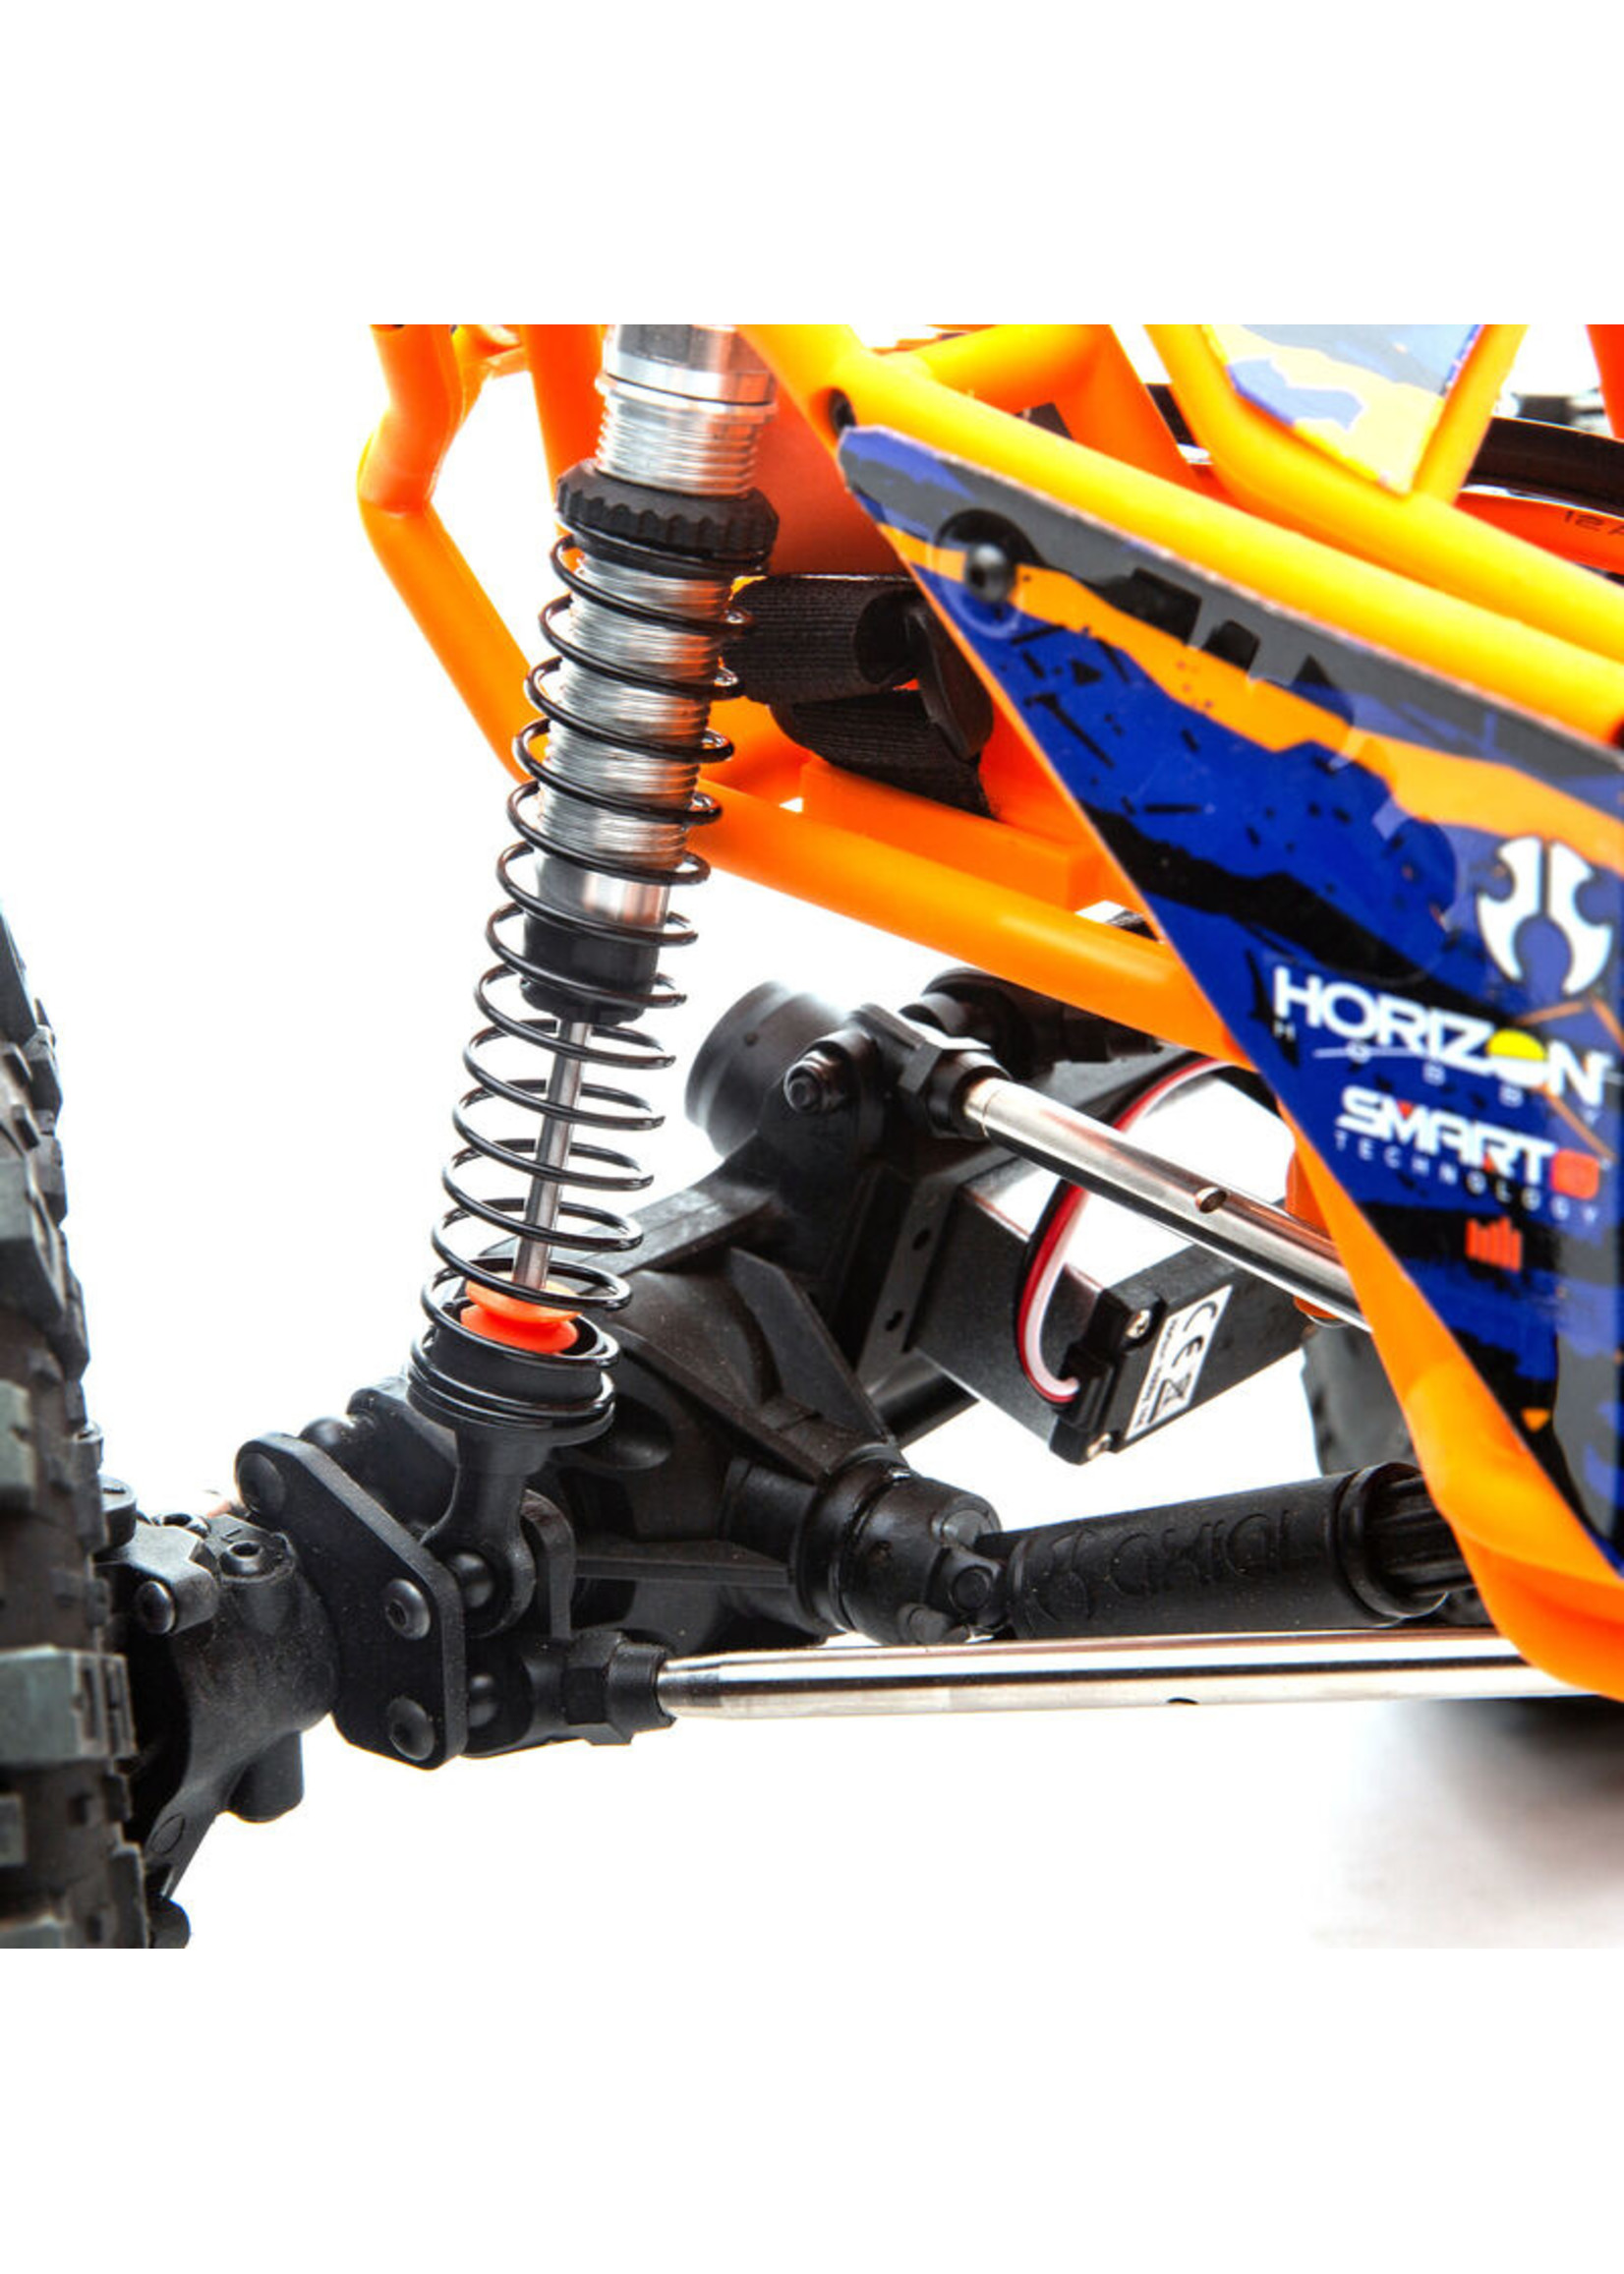 Axial 1/10 RBX10 Ryft 4WD Brushless Rock Bouncer RTR - Orange